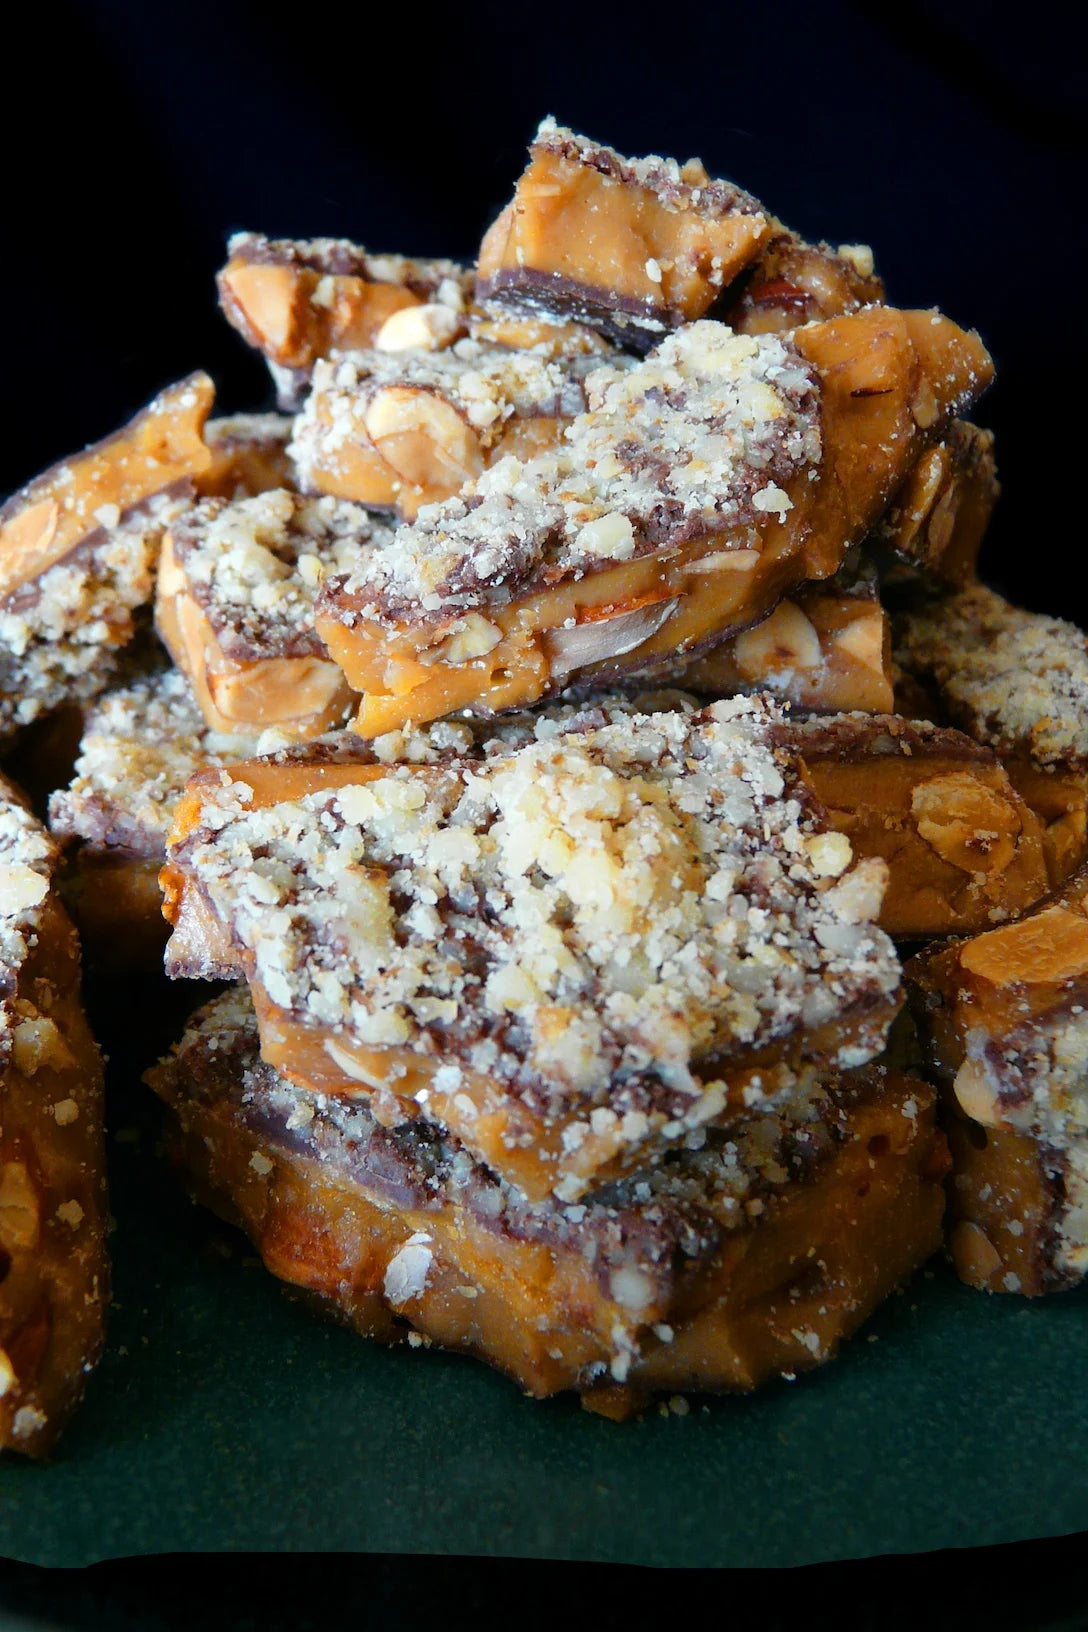 Gourmet Almond Butter Toffee by Christmas Valley Candy Factory